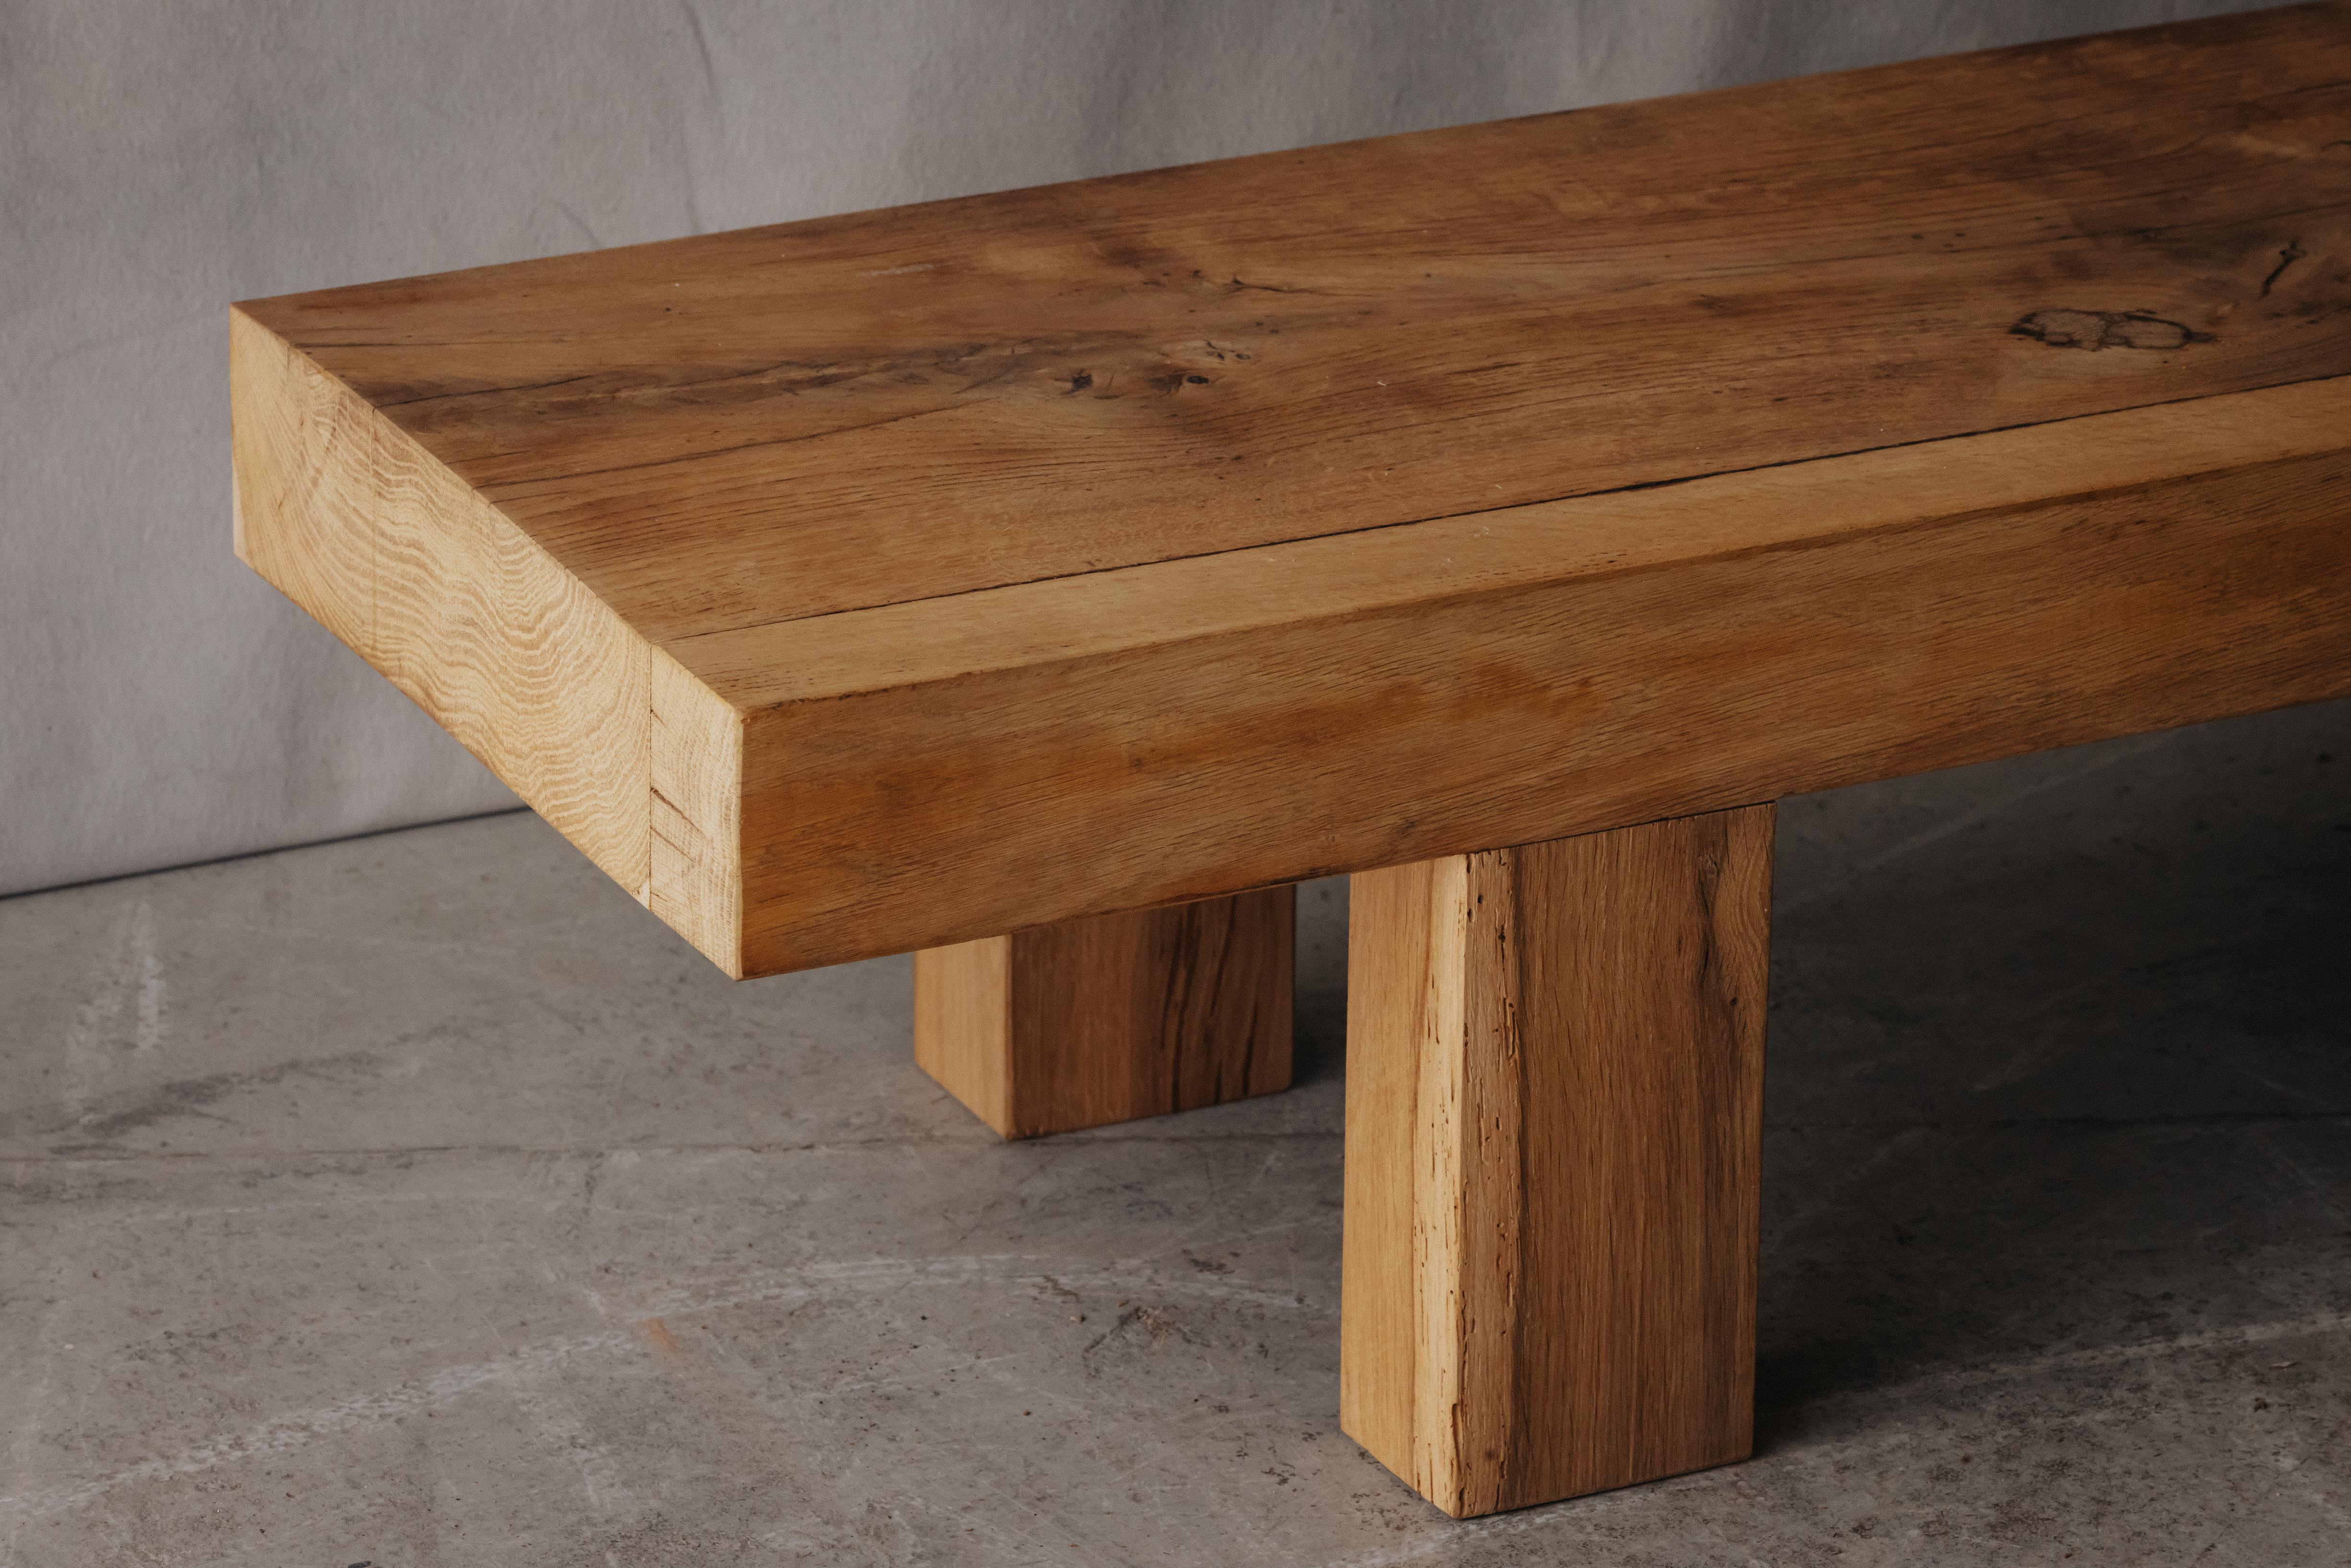 Oak Vintage Primitive Coffee Table From France, Circa 1950 For Sale